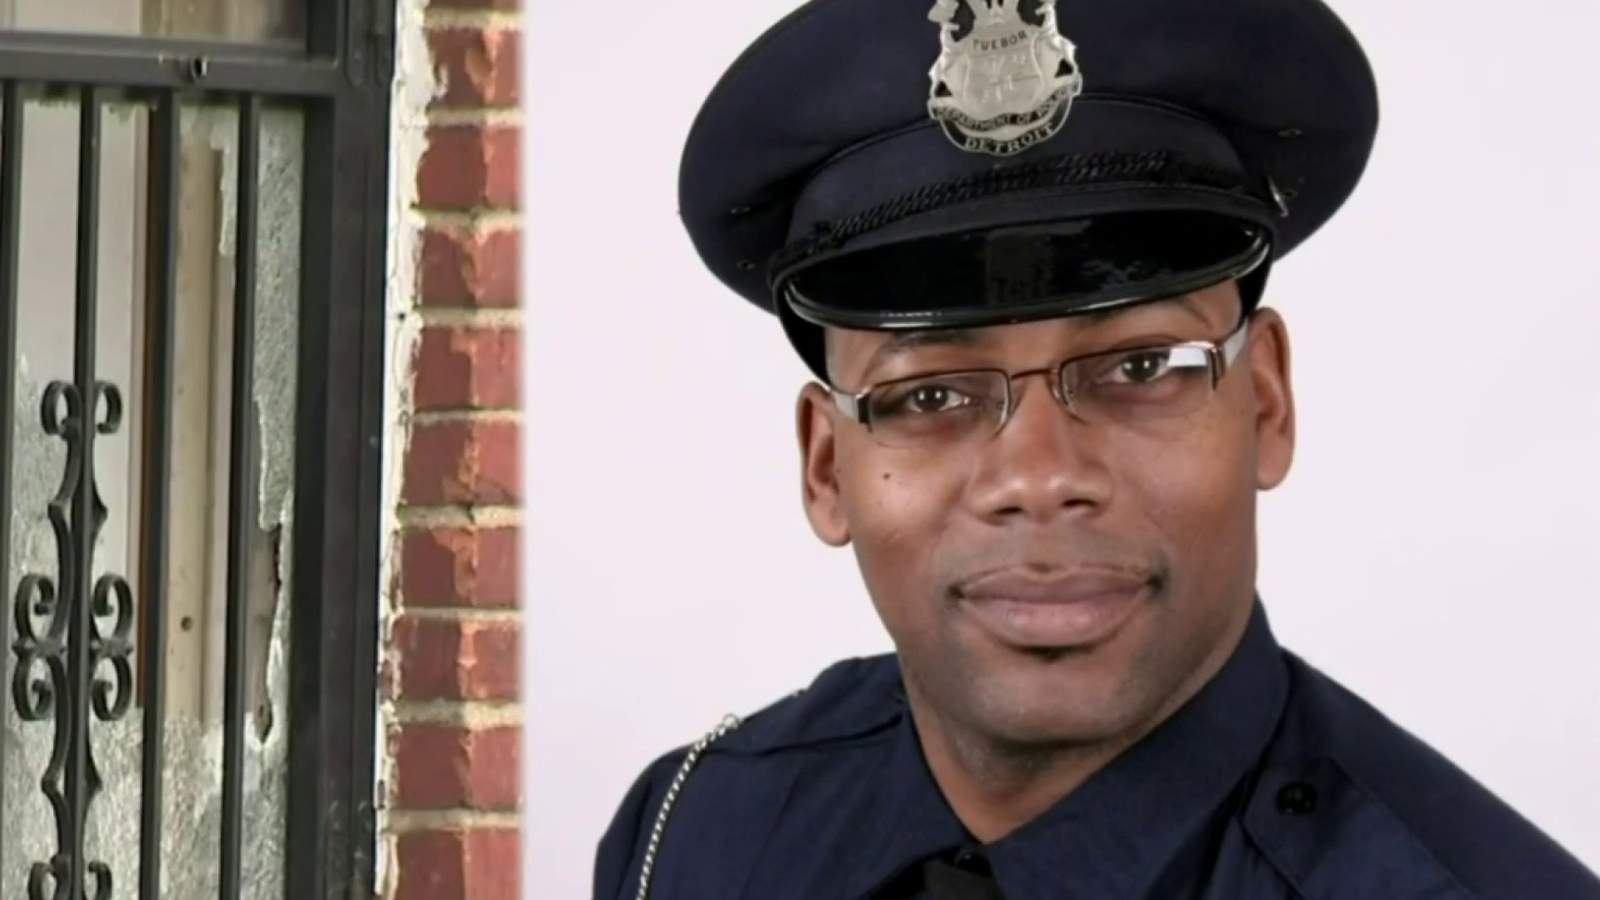 16-year veteran officer identified as victim in deadly police shooting